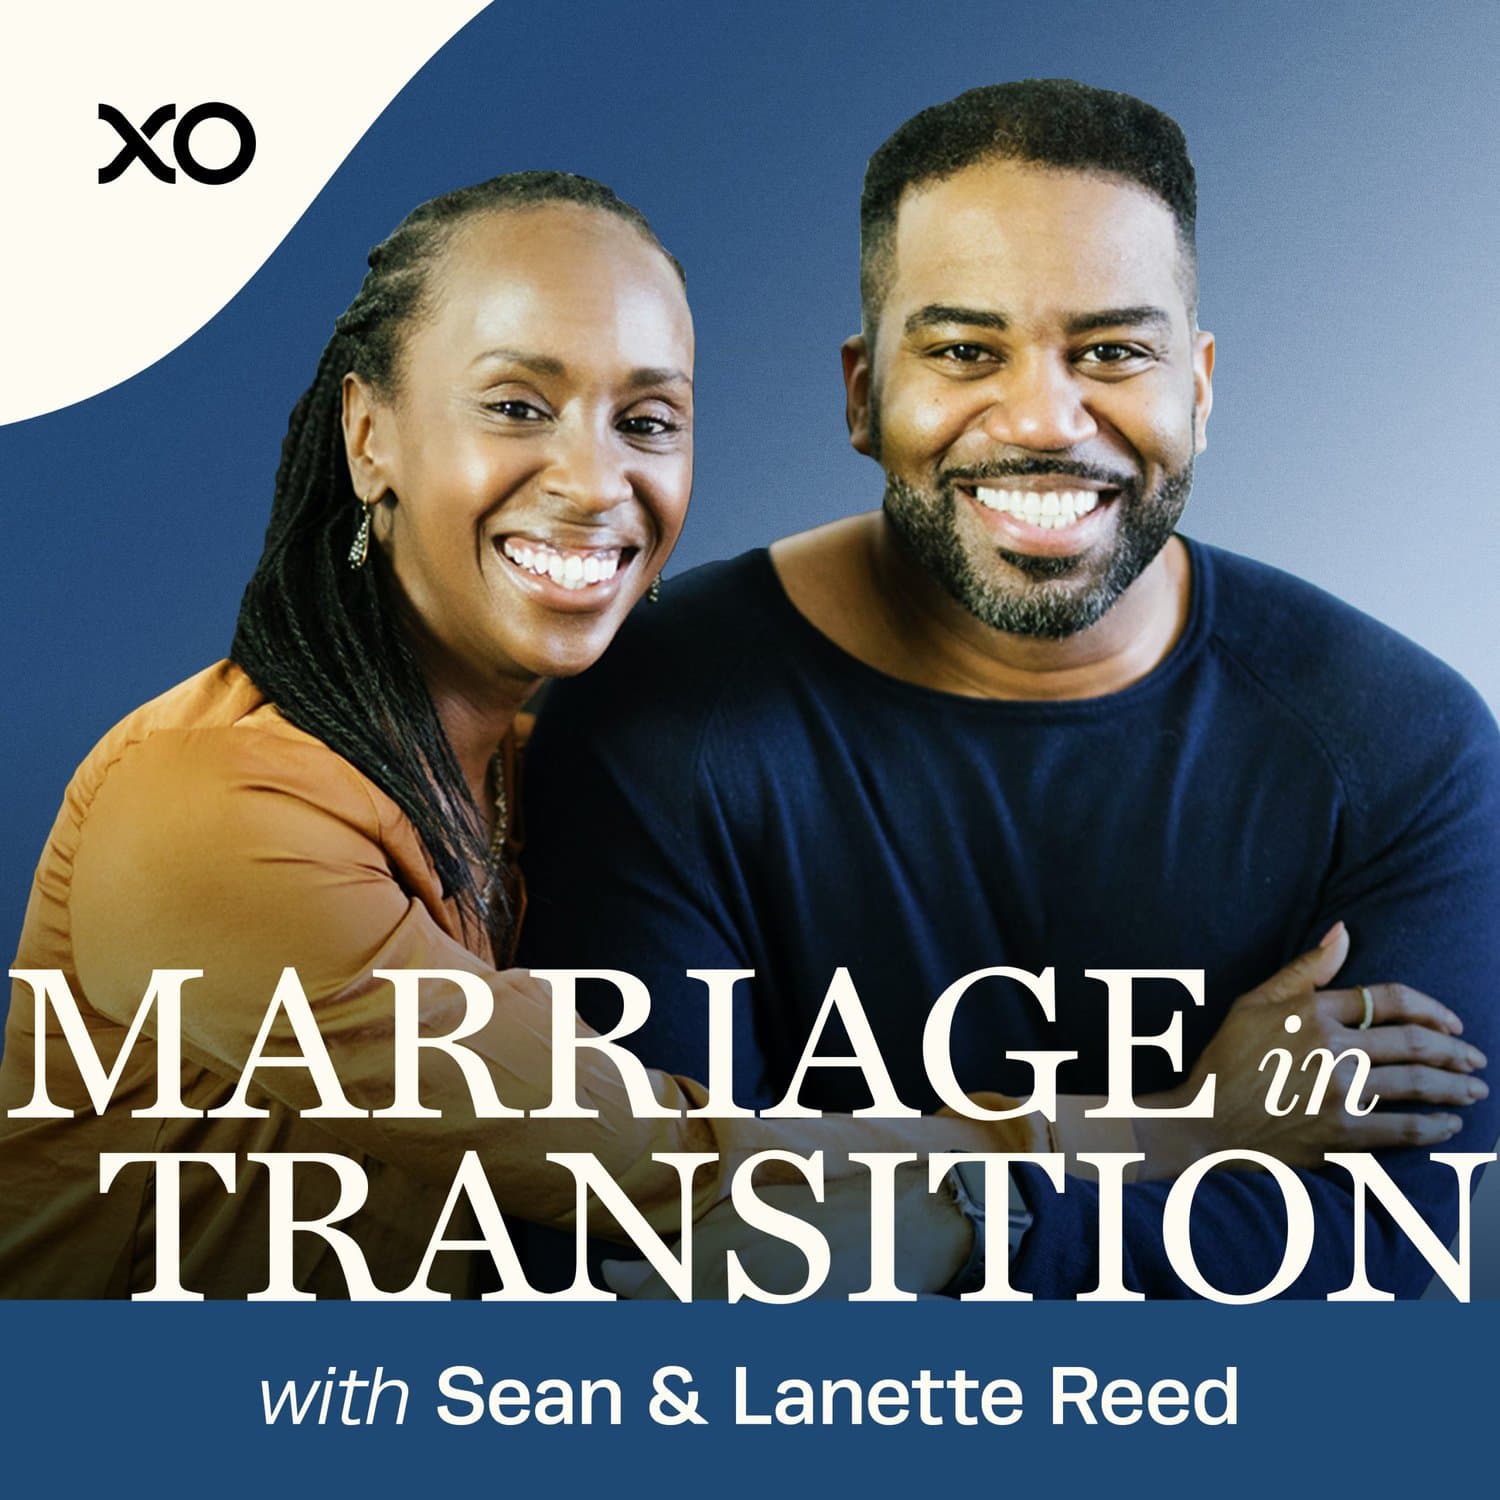 Marriage in Transition with Sean & Lanette Reed